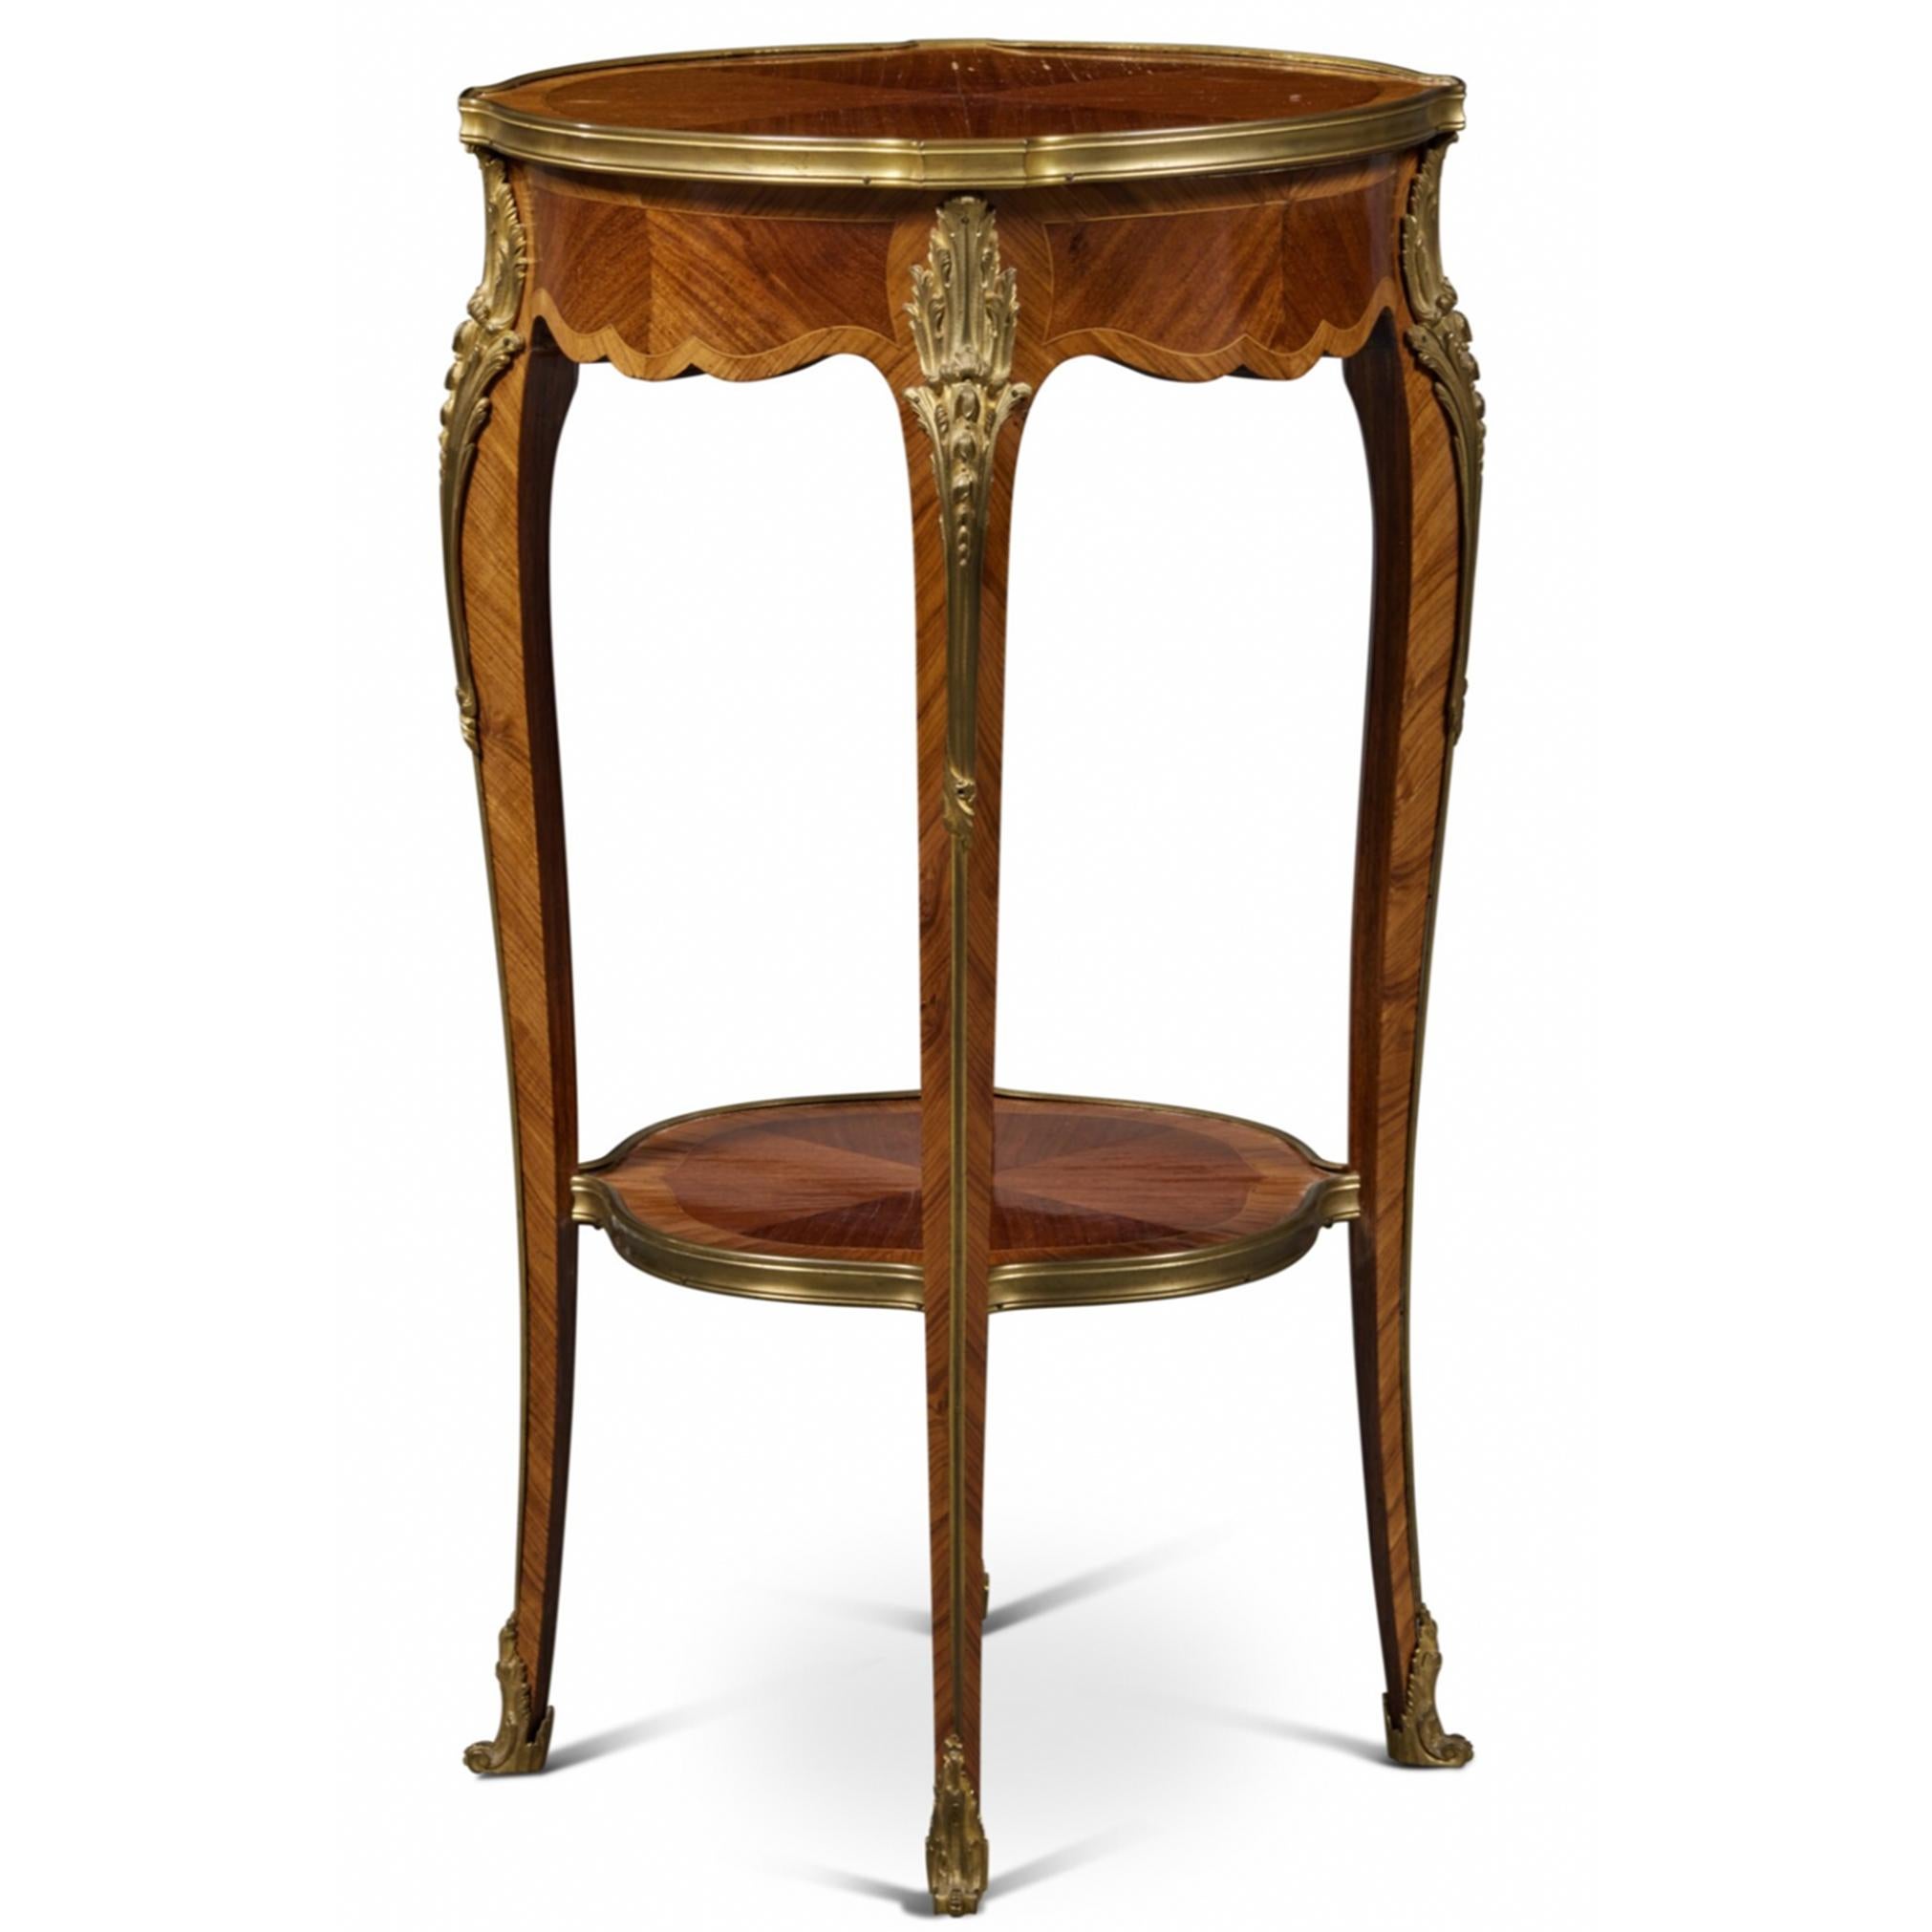 A Louis XV Style Gilt-Bronze Mounted Bois Satiné and Kingwood Side Table, Circa 1900 with a brilliantly detailed veneer, showcasing three shades of wood in contrasting browns, crating a simple and alluring design. 

74.9 cm; 43.2 cm

François